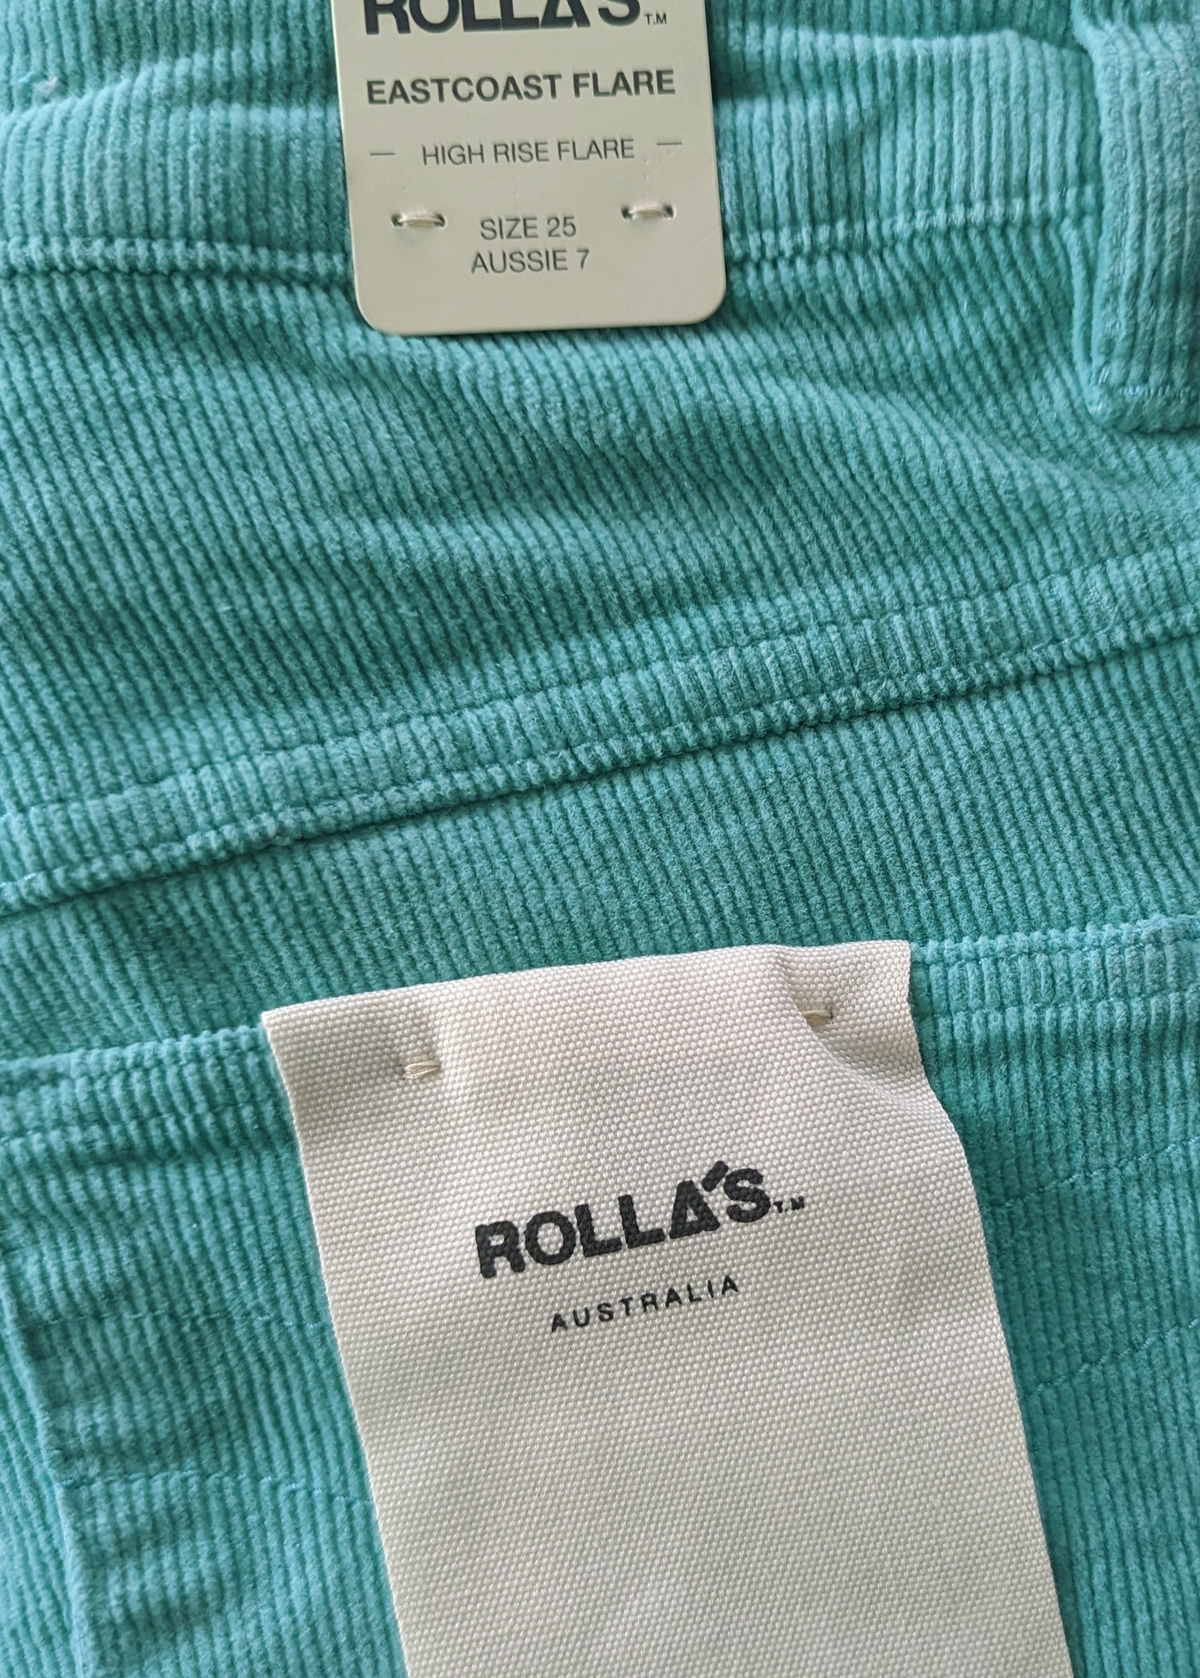 Rolla's Jeans Turquoise Corduroy Flares. 70s inspired bell bottoms with a high rise waist, velvety thin wale corduroy, and a flare leg